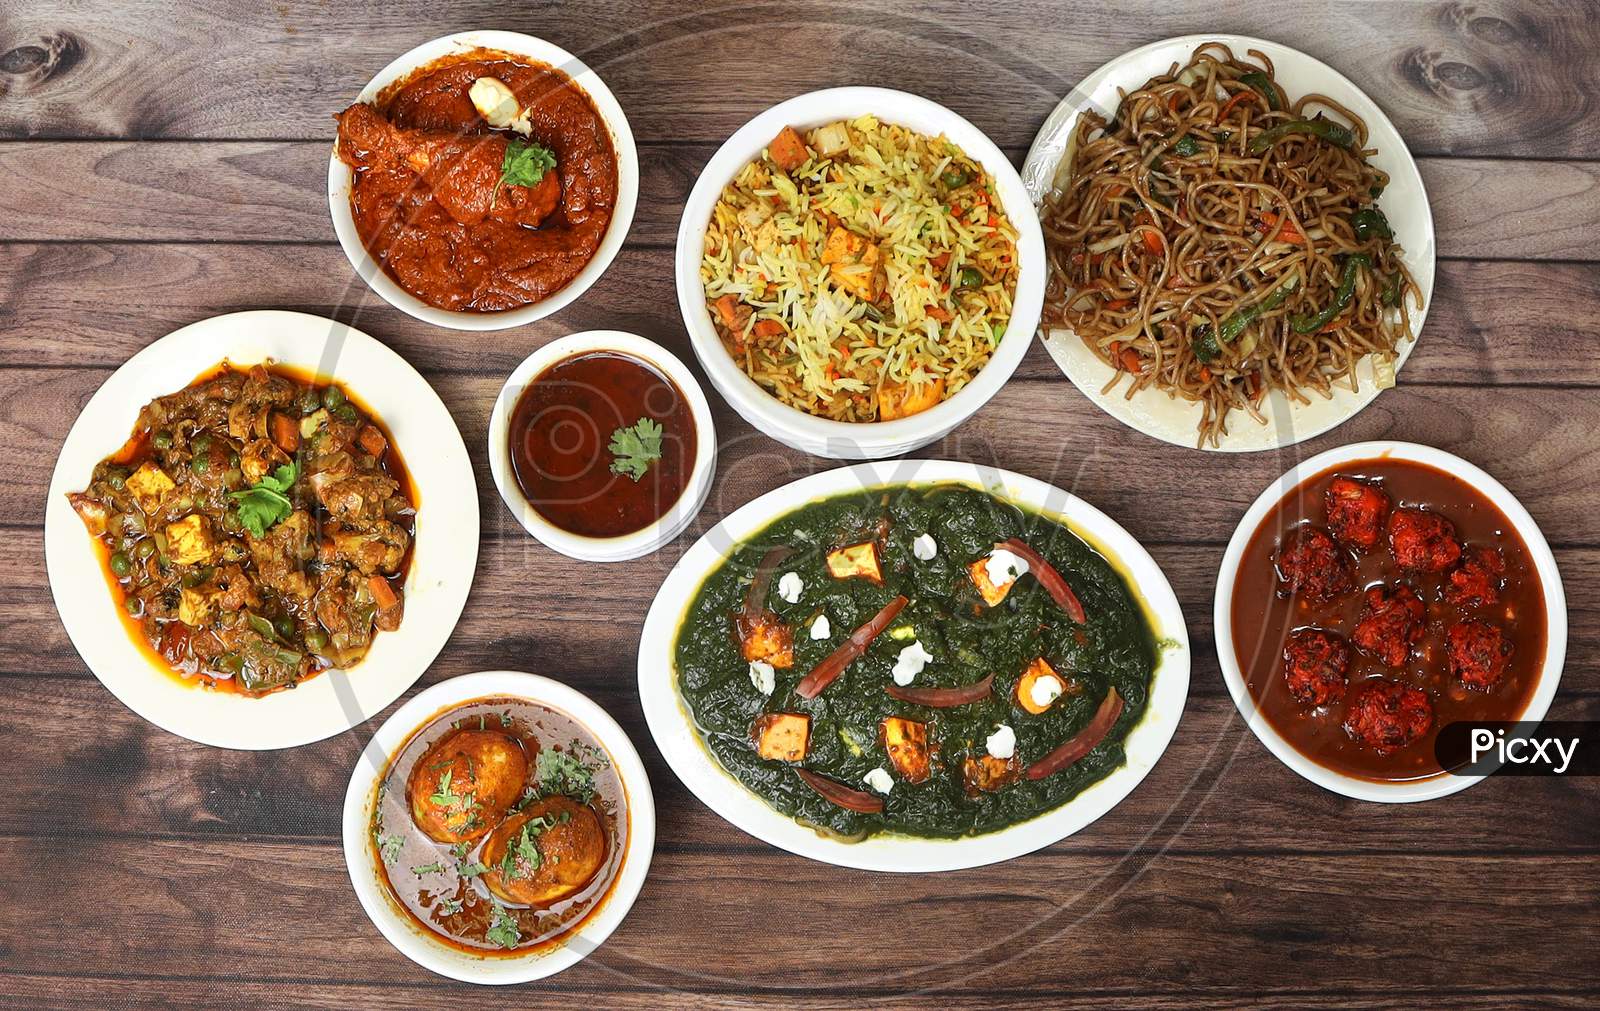 Assorted Indian Food On Wooden Background. Paneer Biryani,Palak Paneer, Butter Chicken Masala,Egg Masala,Noodles,Veg Mix Curry.. Dishes And Appetizers Of Indian Cuisine